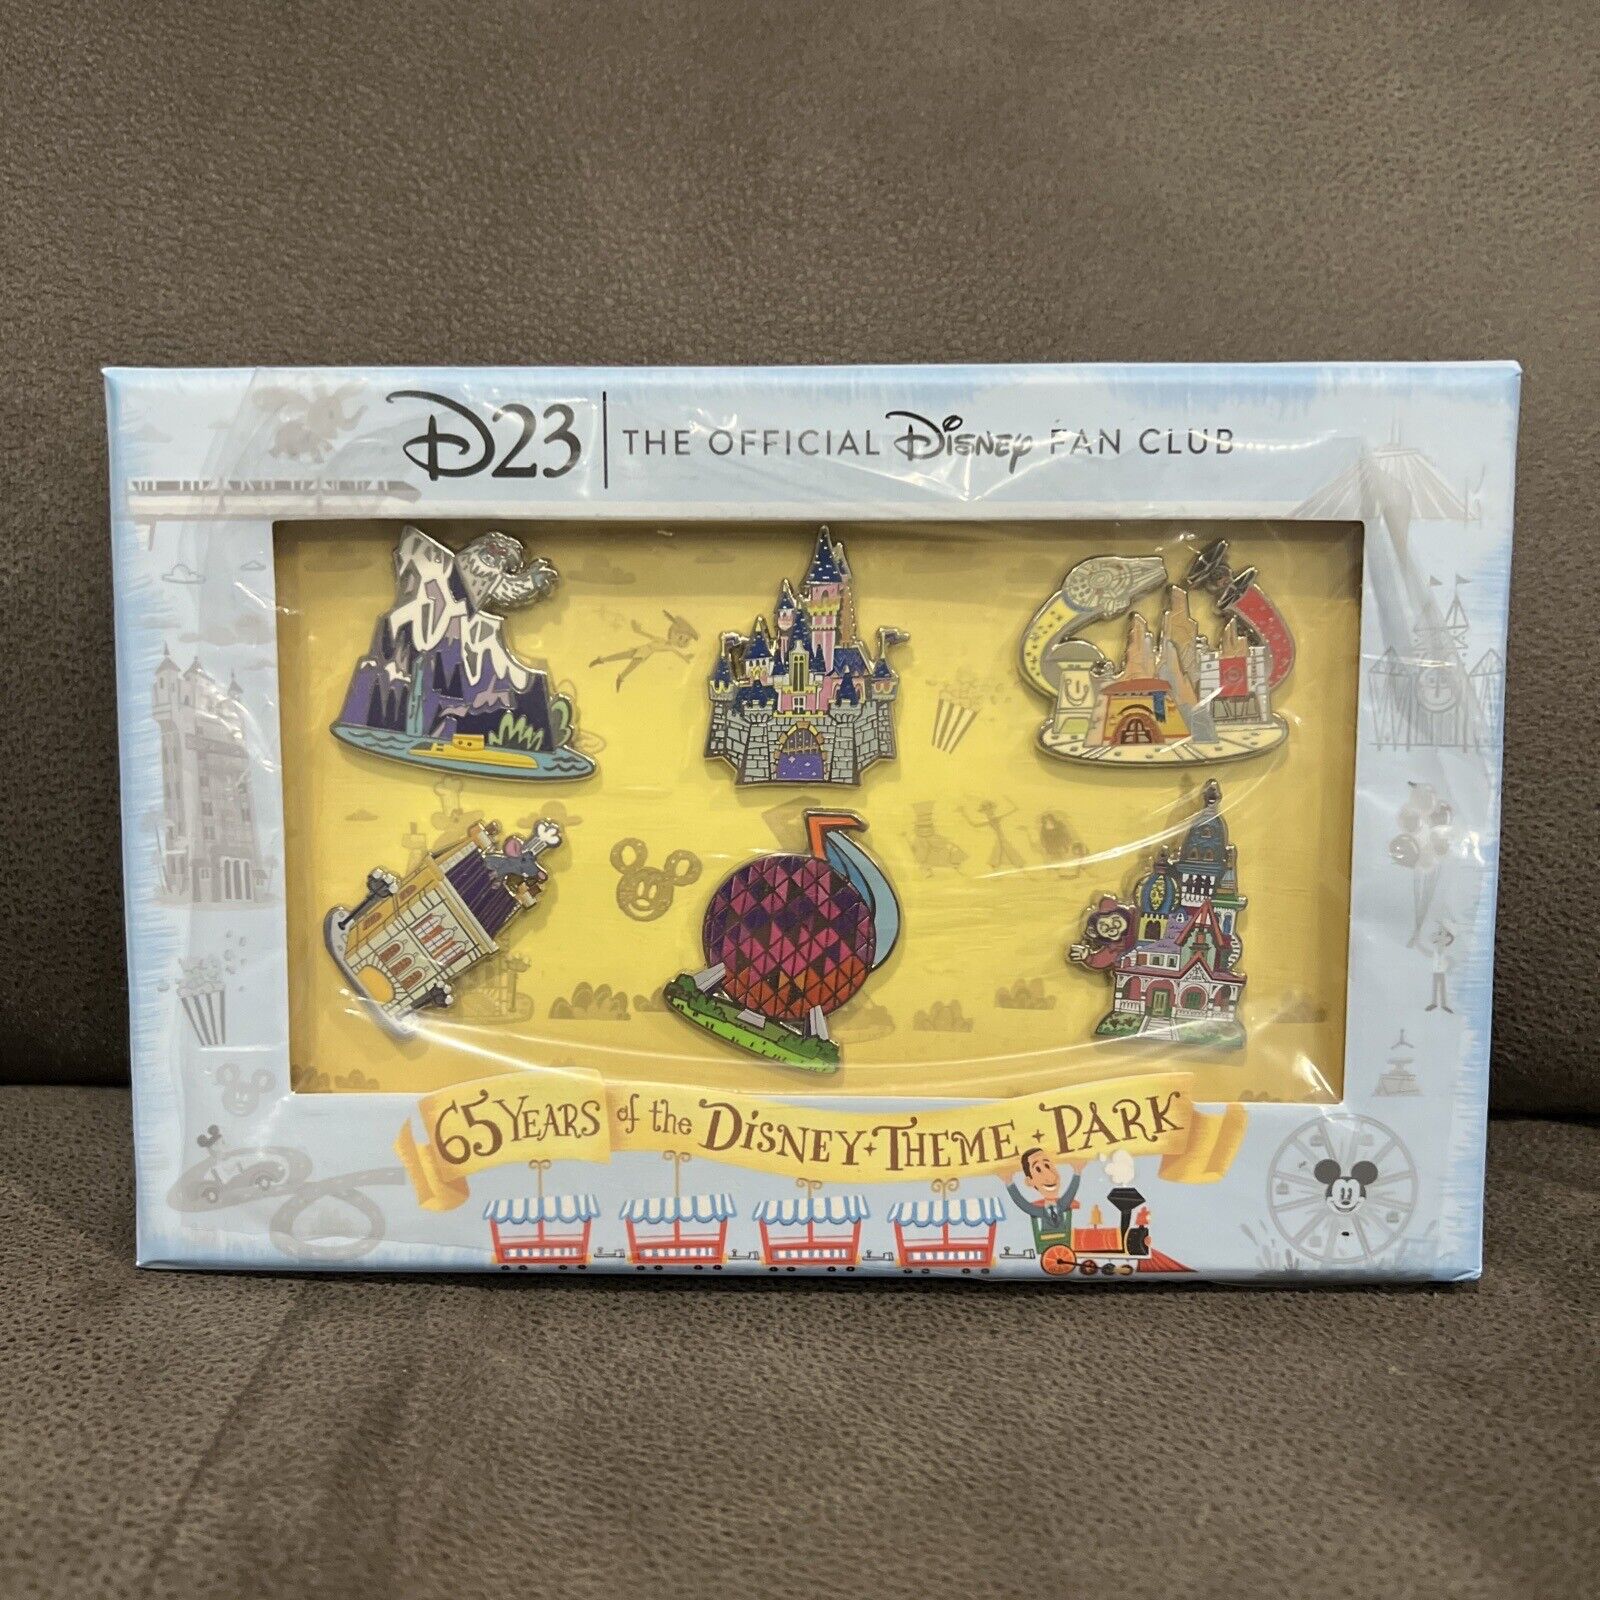  D23-EXCLUSIVE PIN SET CELEBRATES 65 YEARS OF THE DISNEY THEME PARKS